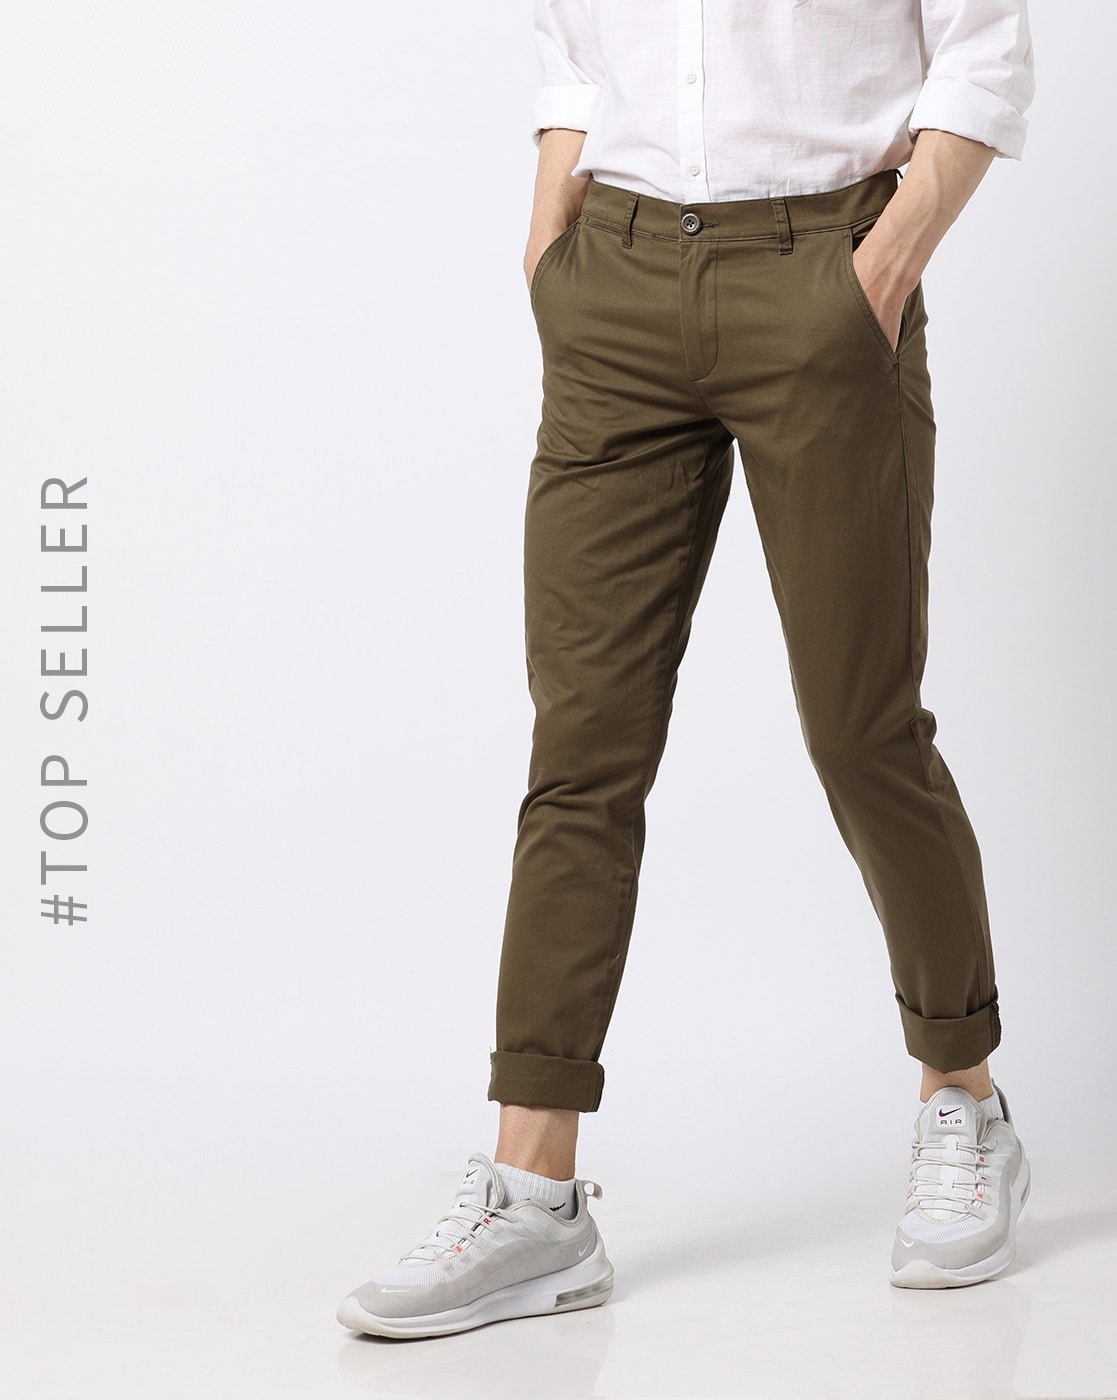 Mens Trousers Save 60% Slacks and Chinos Philippe Model Trousers Philippe Model Cotton Trousers in Green for Men Slacks and Chinos 